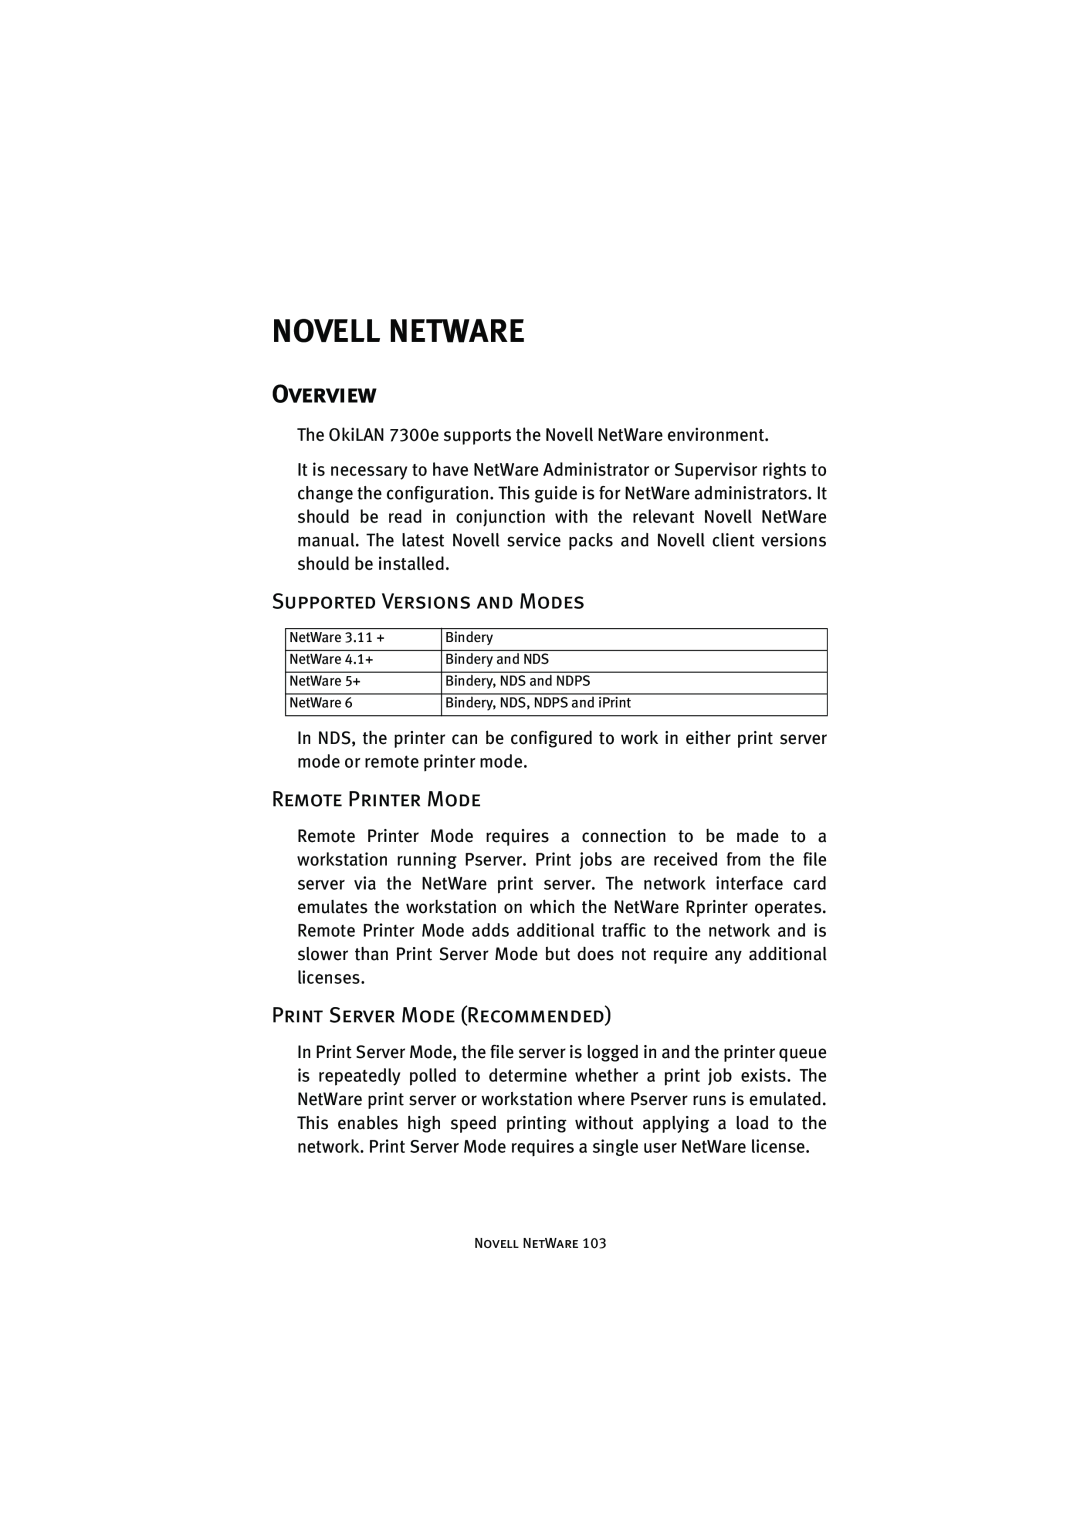 Oki 7300e manual Novell Netware, Supported Versions and Modes, Remote Printer Mode, Print Server Mode Recommended, Overview 